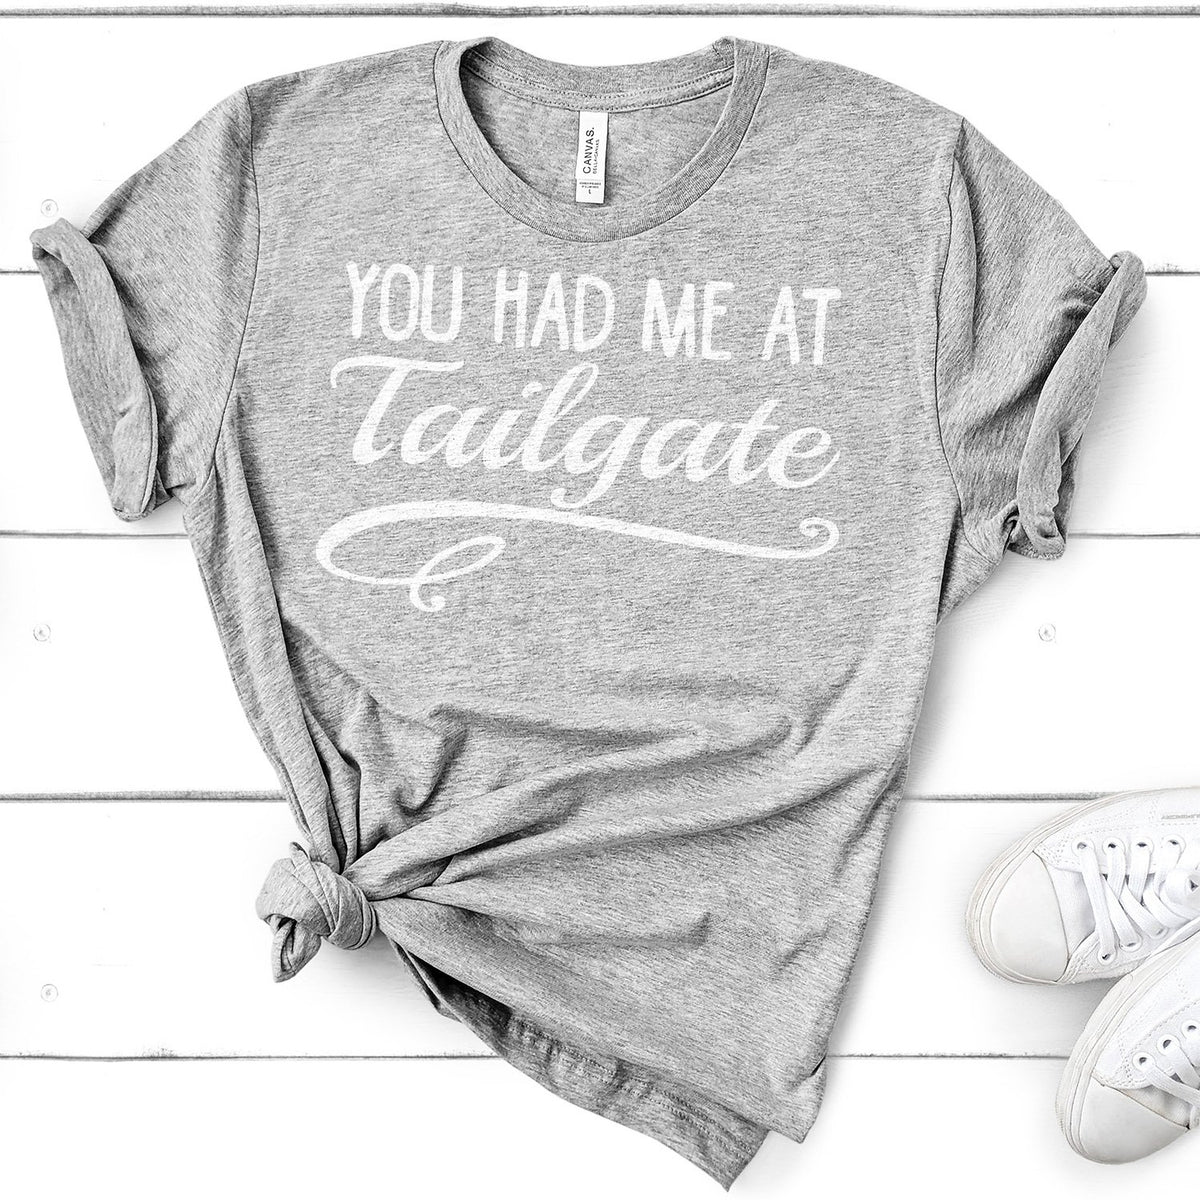 You Had Me At Tailgate - Short Sleeve Tee Shirt